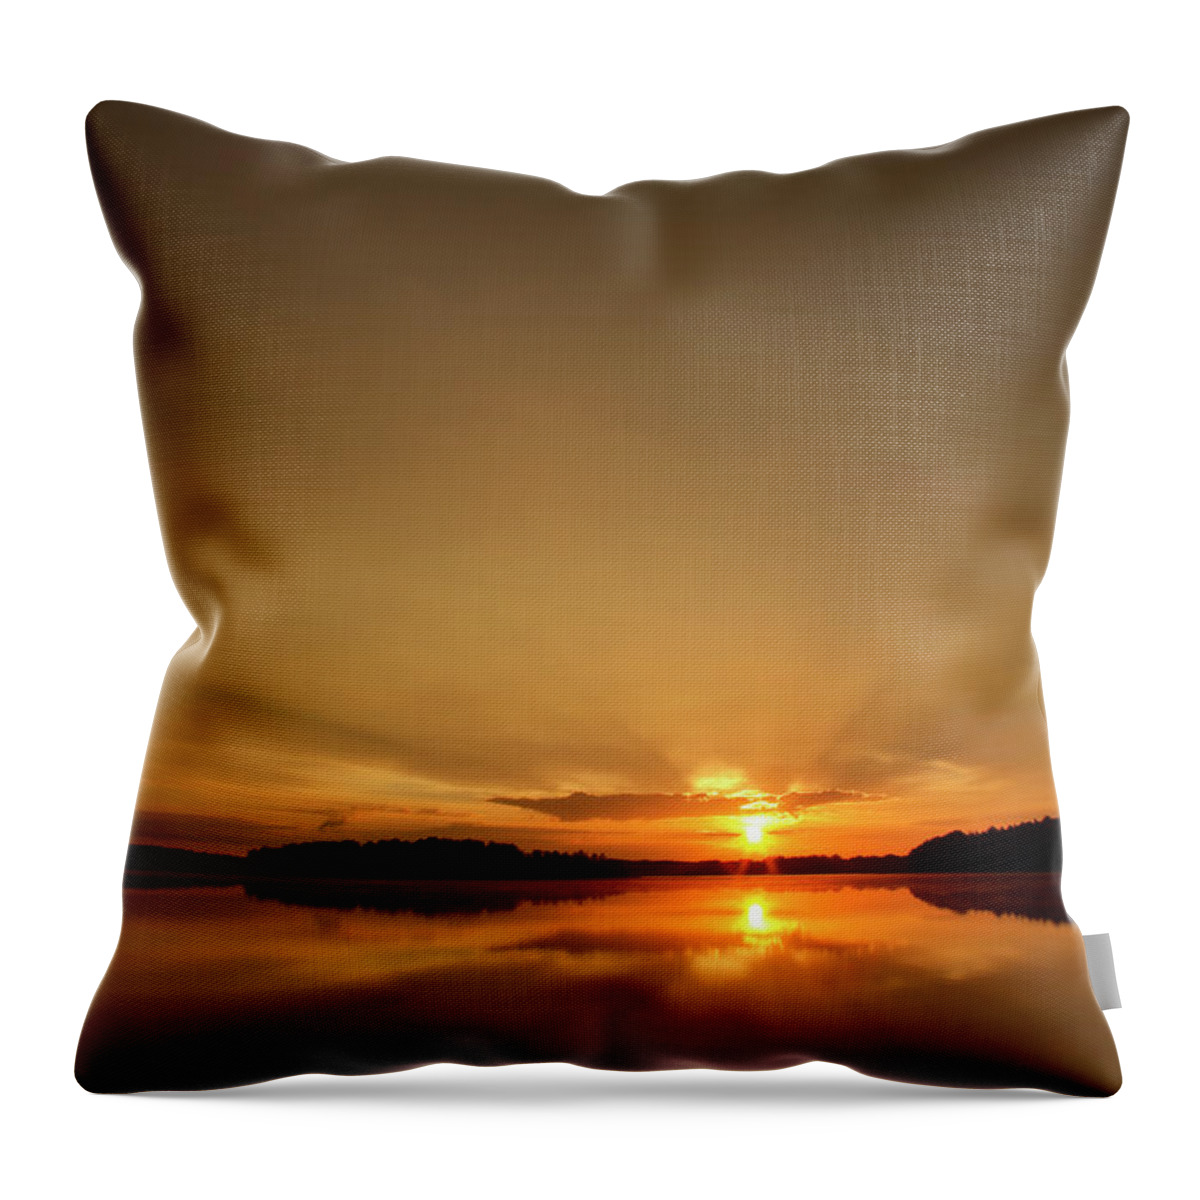 Water's Edge Throw Pillow featuring the photograph Morning Sun by Avtg